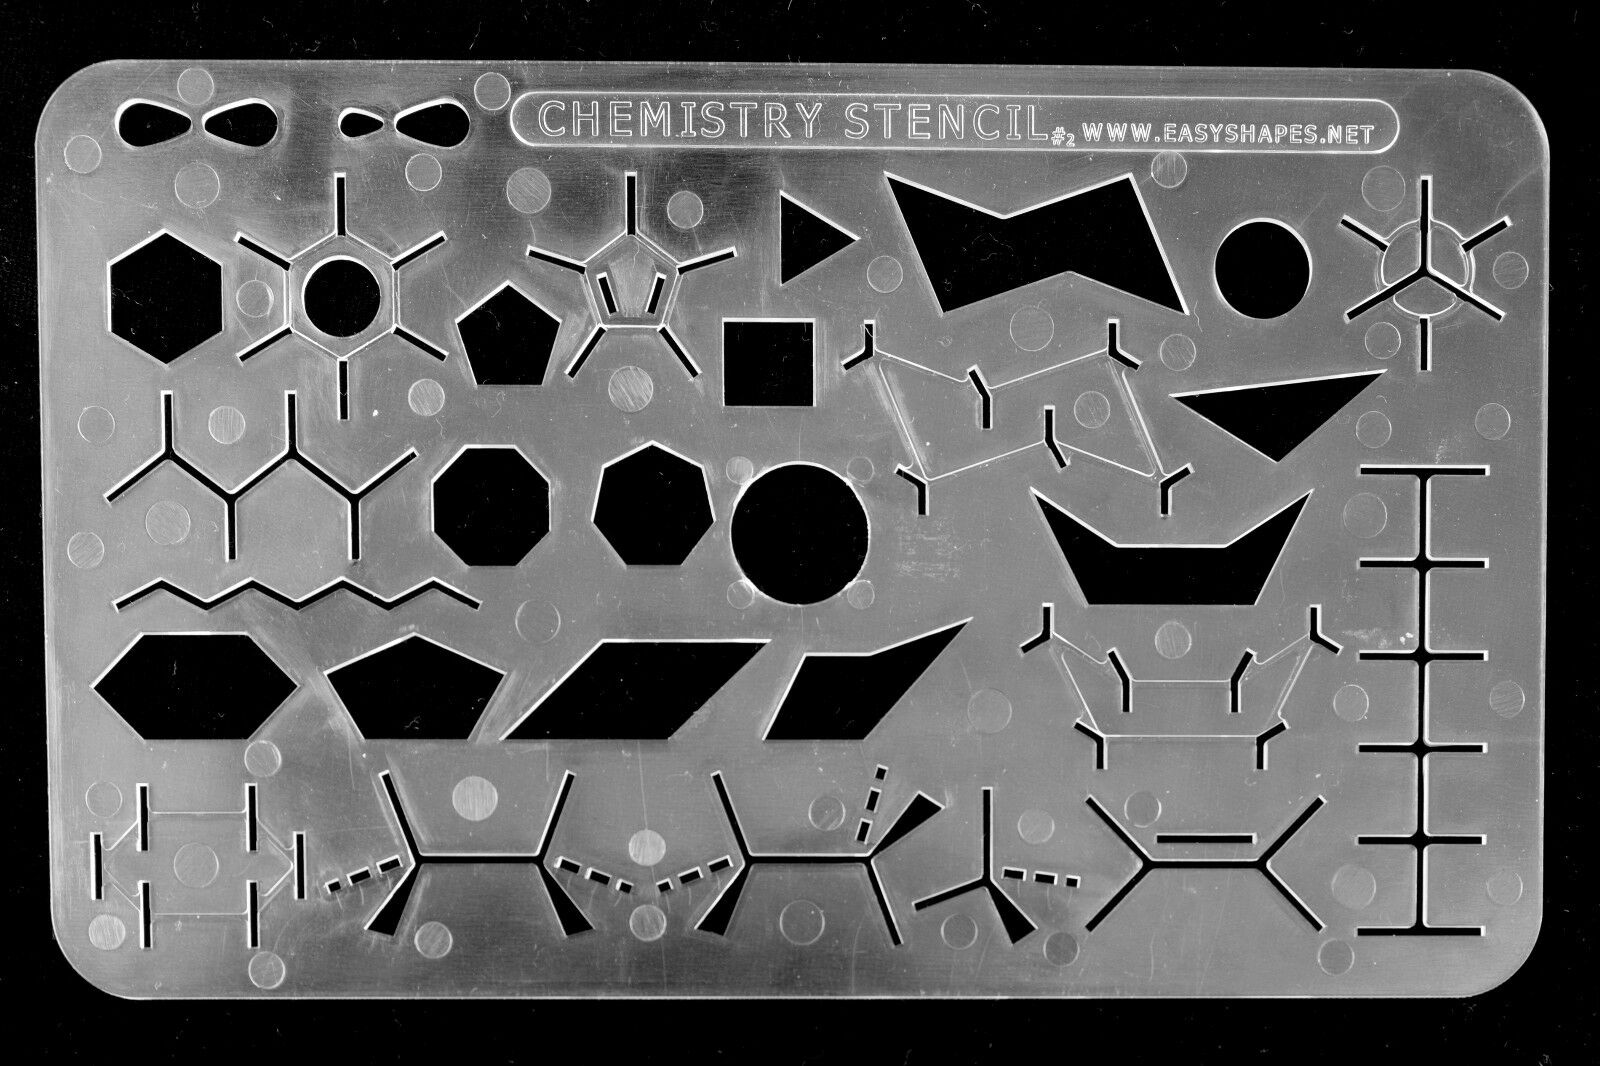 Organic Chemistry Stencil Drawing Template Easyshapes - Free Shipping